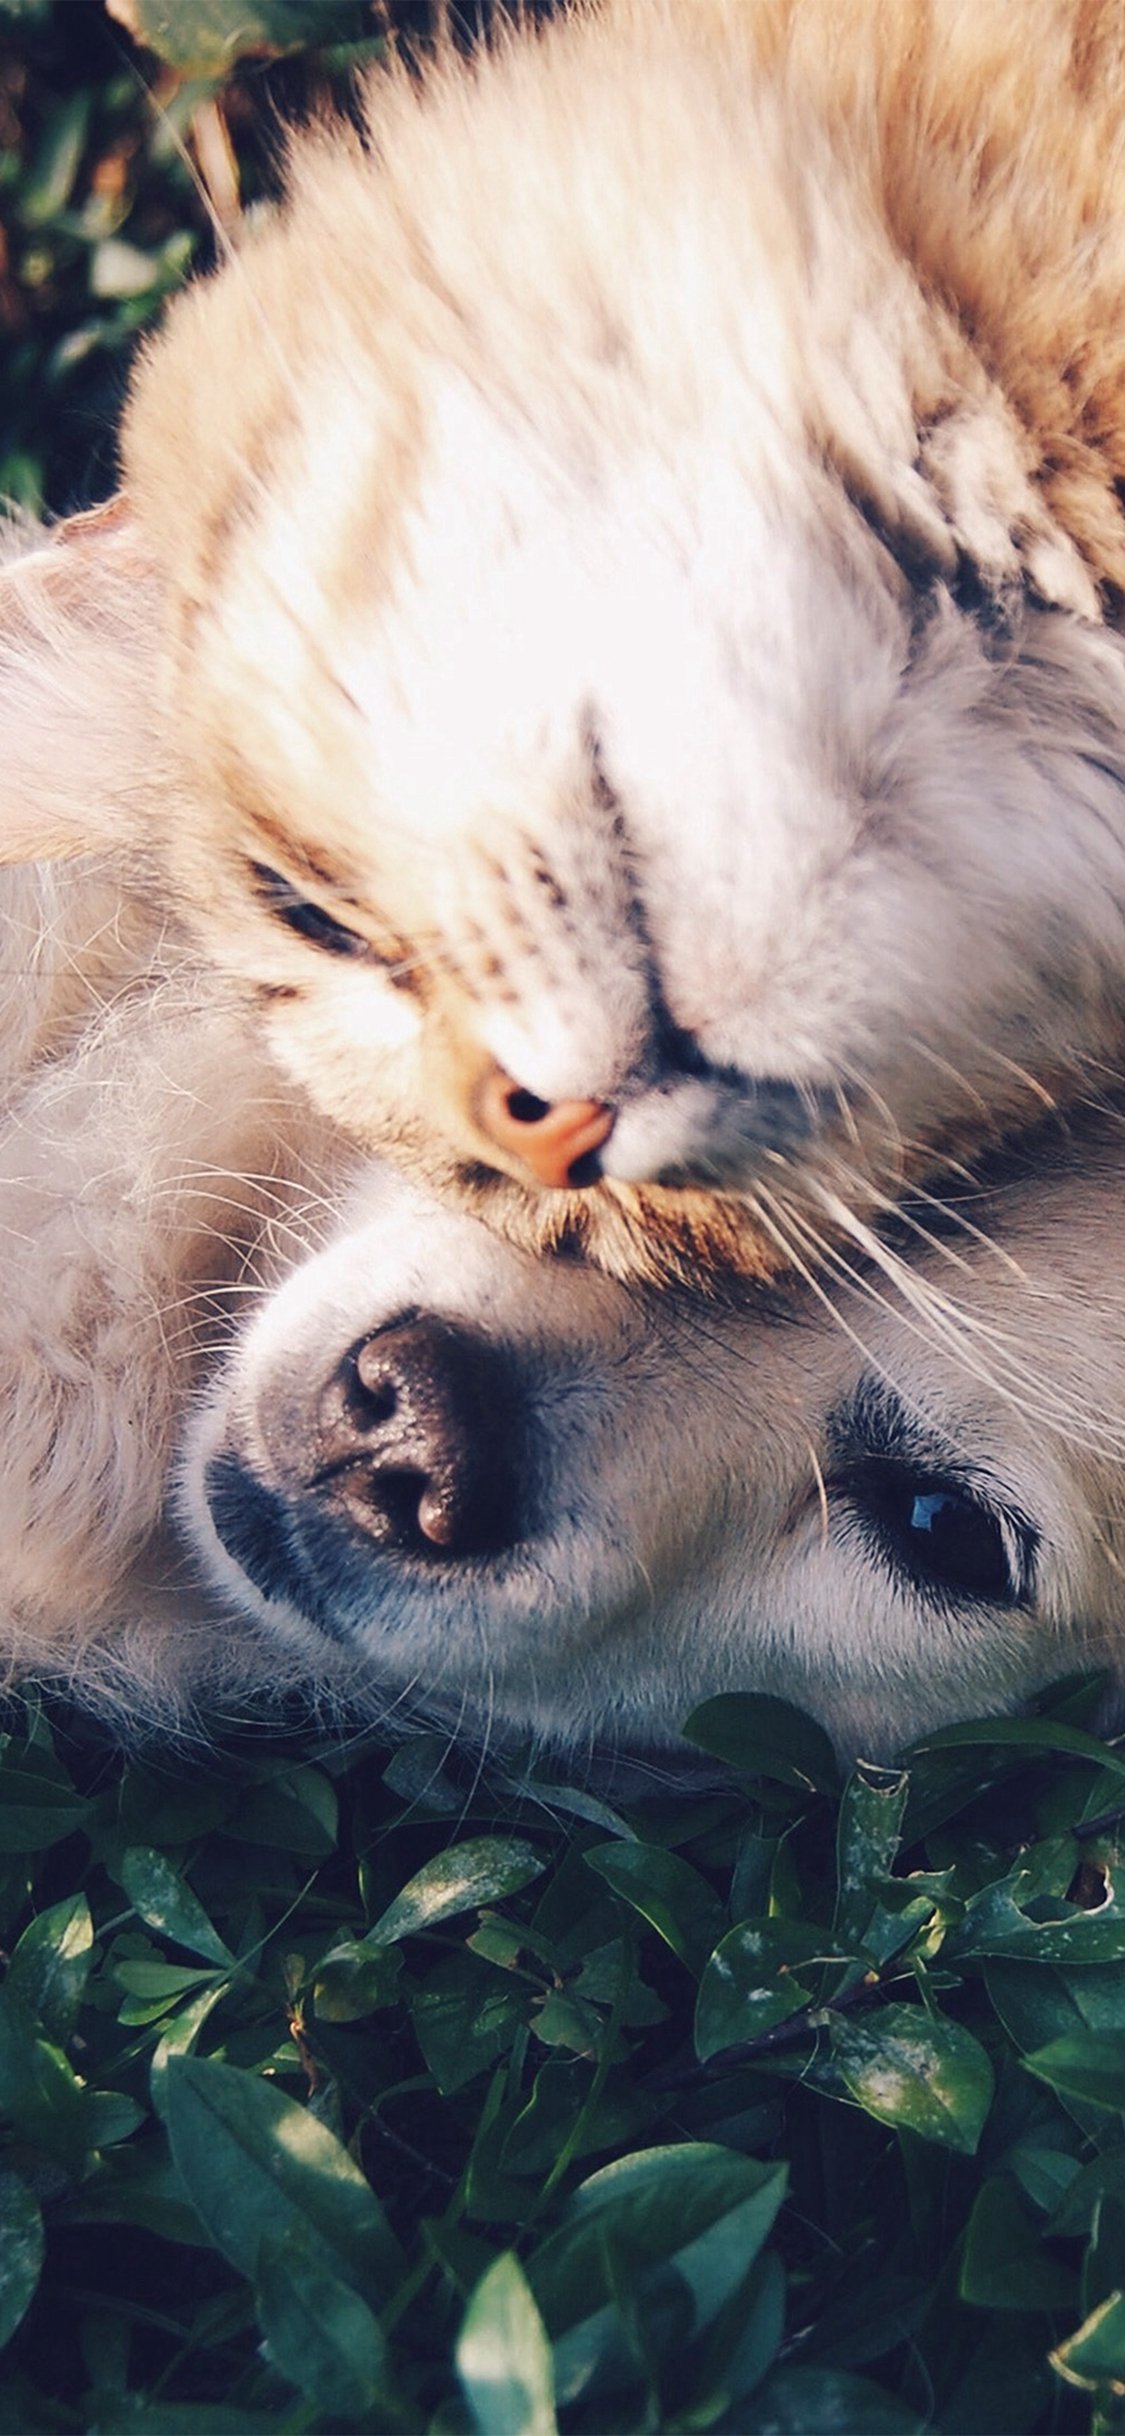 Cat And Dog Animal Love Nature Pure iPhone X Wallpaper Free Download